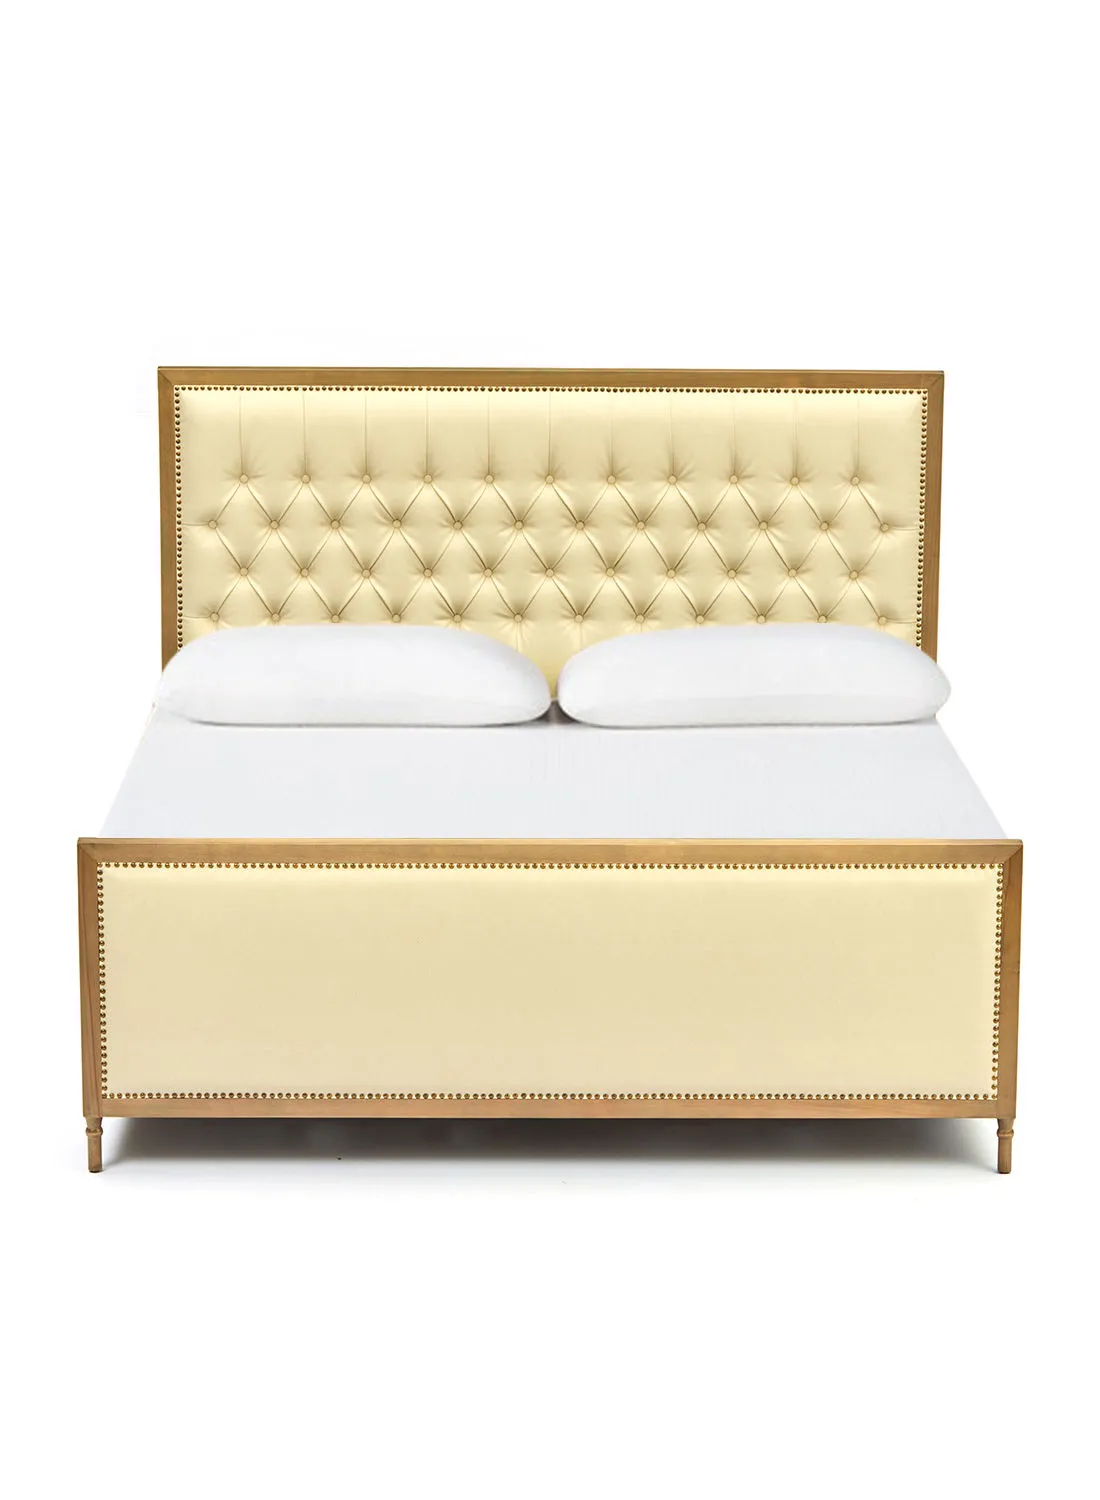 ebb & flow Bed Frame Luxurious - Queen Size Bed - Elegant Stud Collection - Off-White Color - Size 186 X 208 X 110 - Luxurious Home